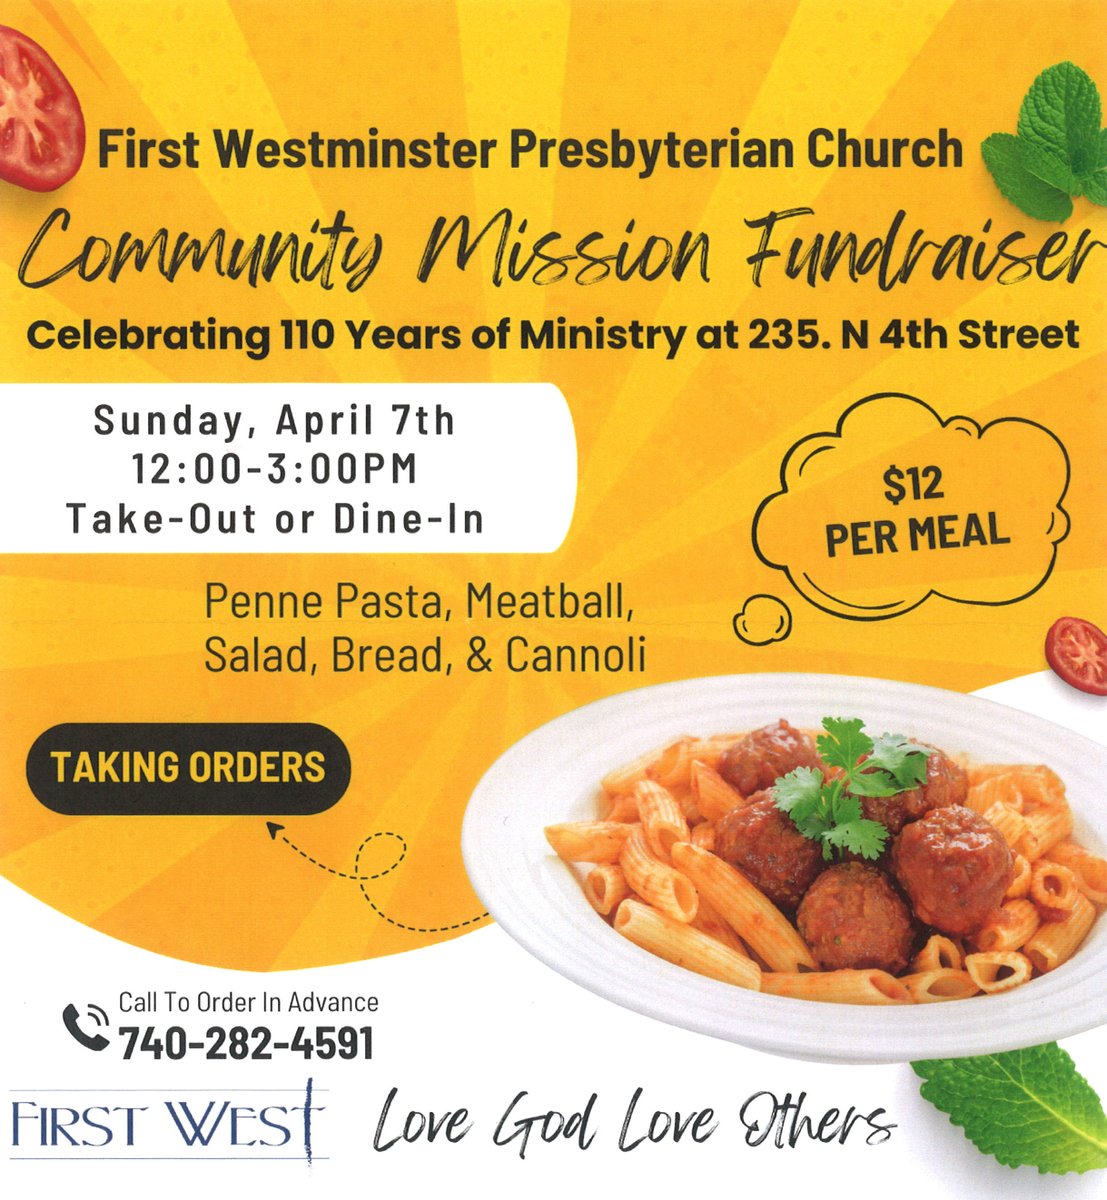 Please consider supporting our friends at First Westminster Presbyterian Church for their Community Mission Fundraiser on April 7th!